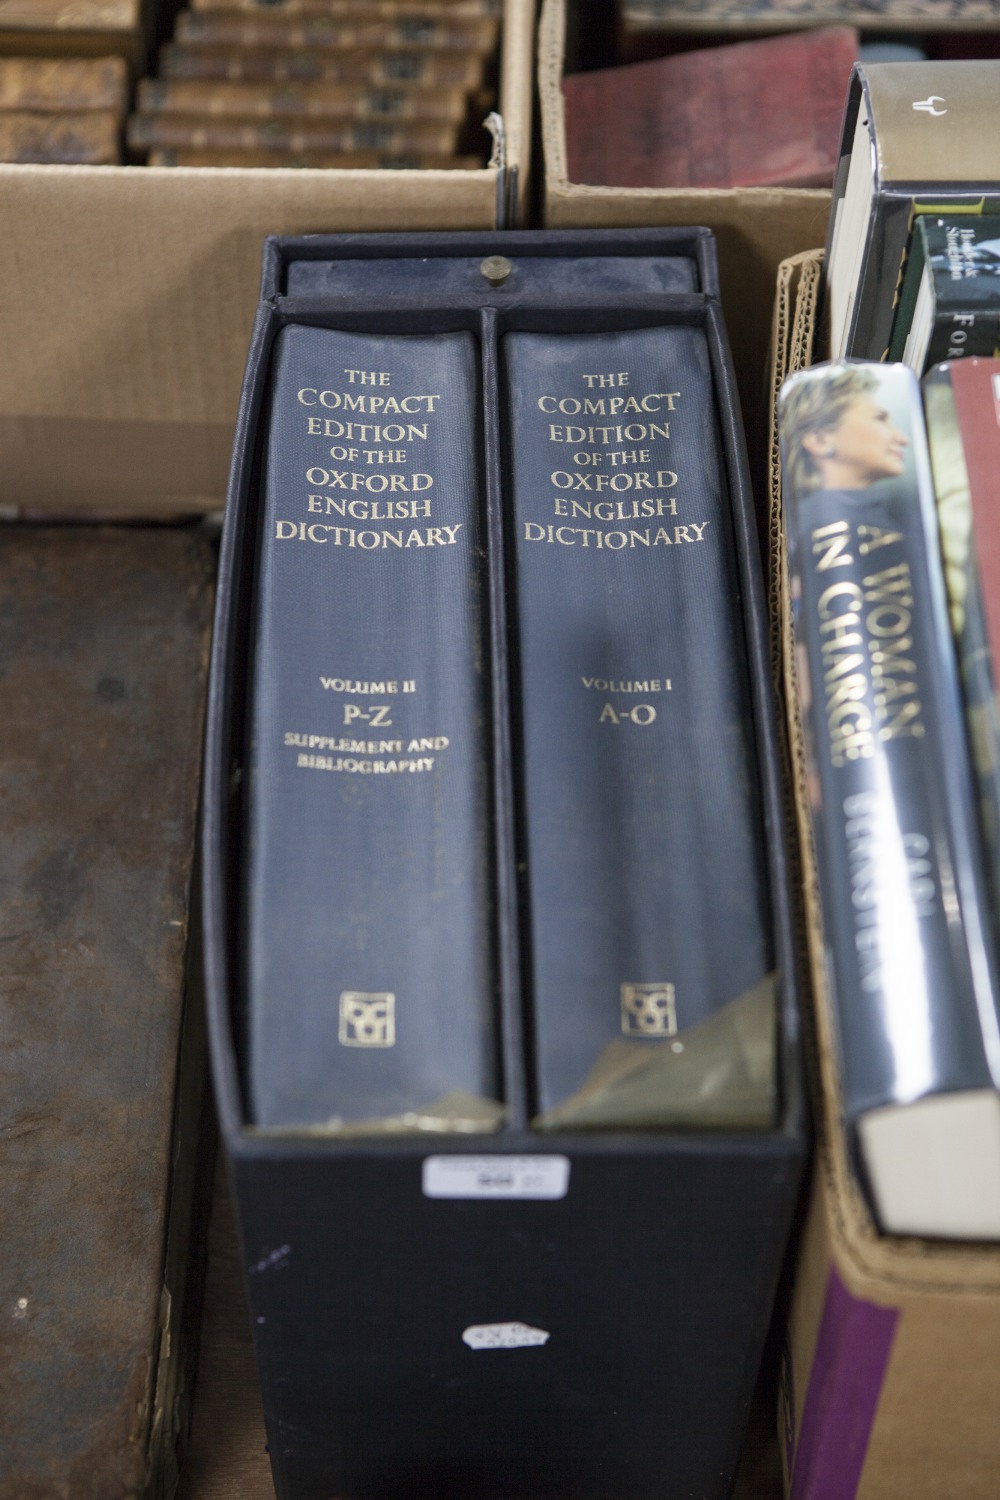 HARMSWORTH'S NEW ATLAS OF THE WORLD, circa 1920s and thew Compact Edition of the Oxford Dictionary